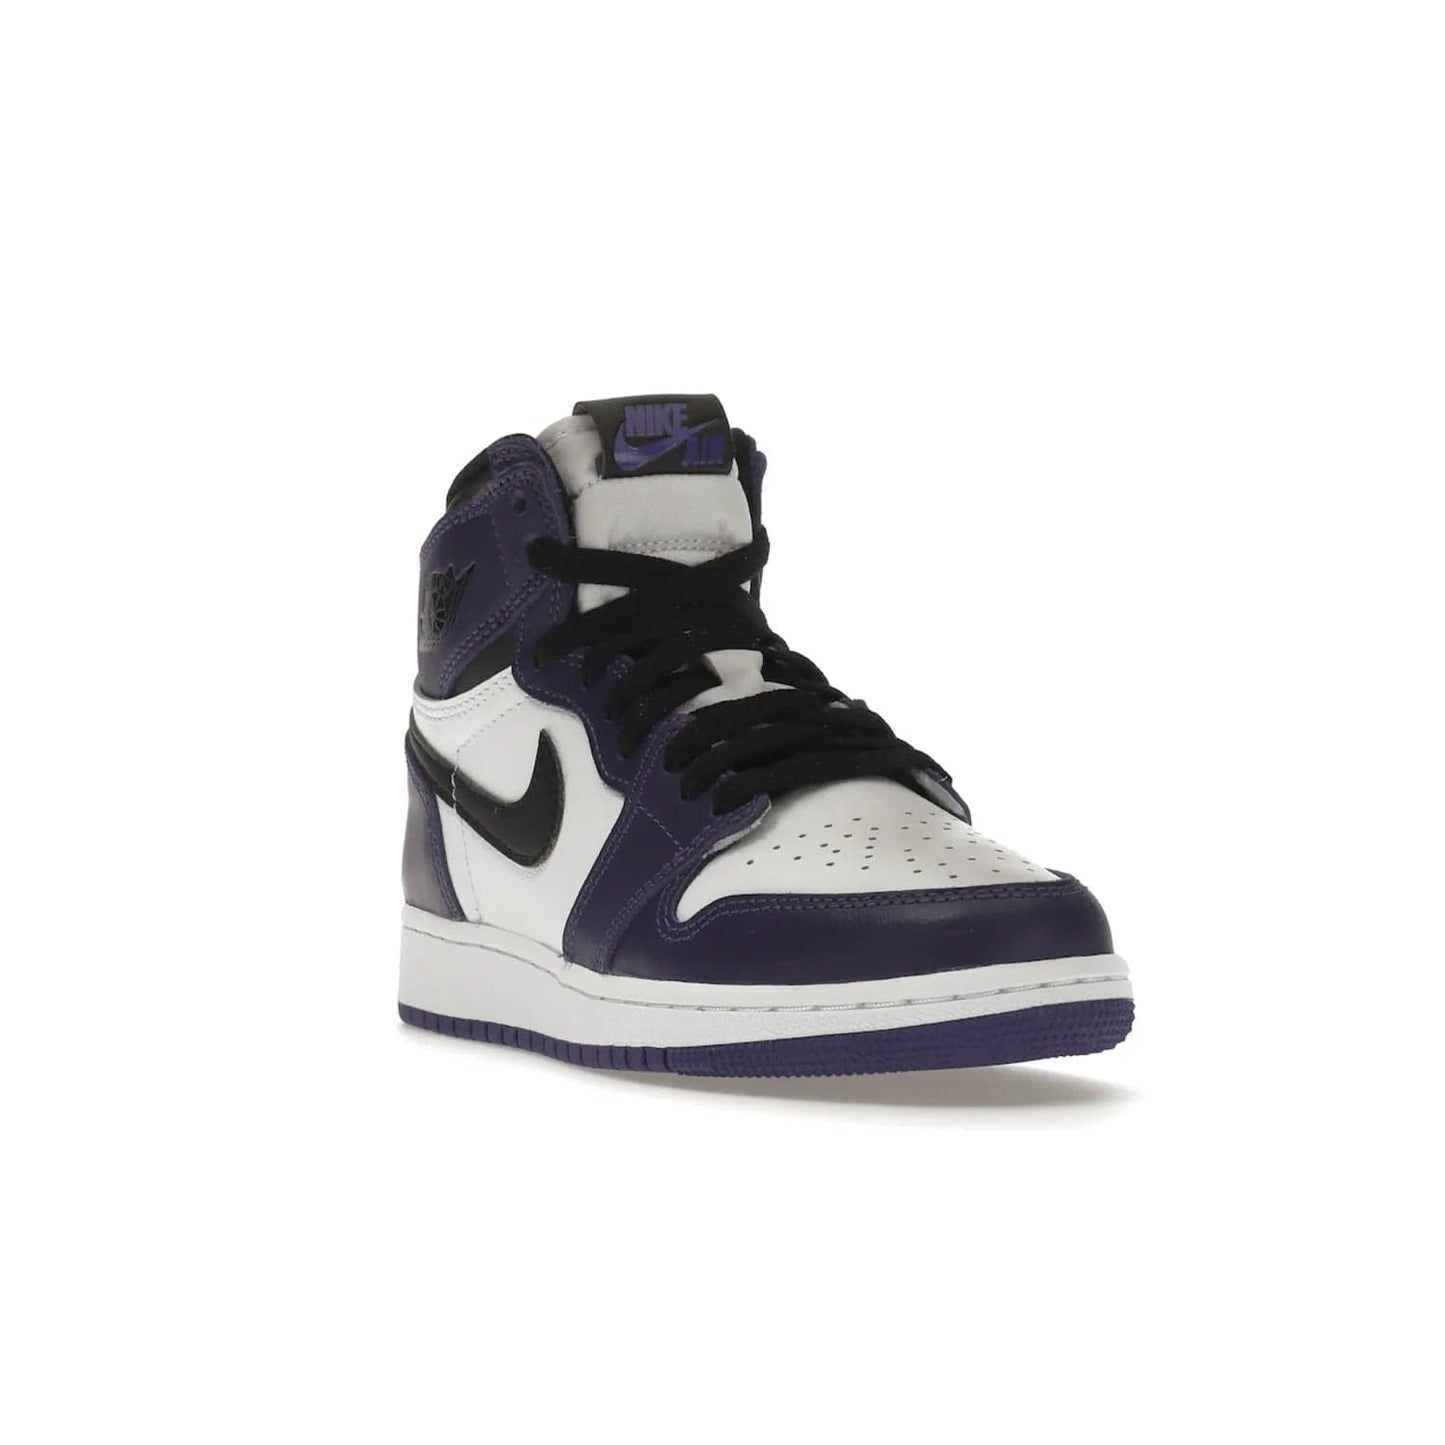 Jordan 1 Retro High Court Purple White (GS) - Image 7 - Only at www.BallersClubKickz.com - The Air Jordan 1 Retro High Court Purple is here and young sneaker heads can show off classic style. Features a white tumbled leather upper, black swoosh, purple overlays, black collar with purple overlay, white tongue, black patch with purple Nike Air logo and swoosh, white midsole, and purple rubber outsole with circular pattern.